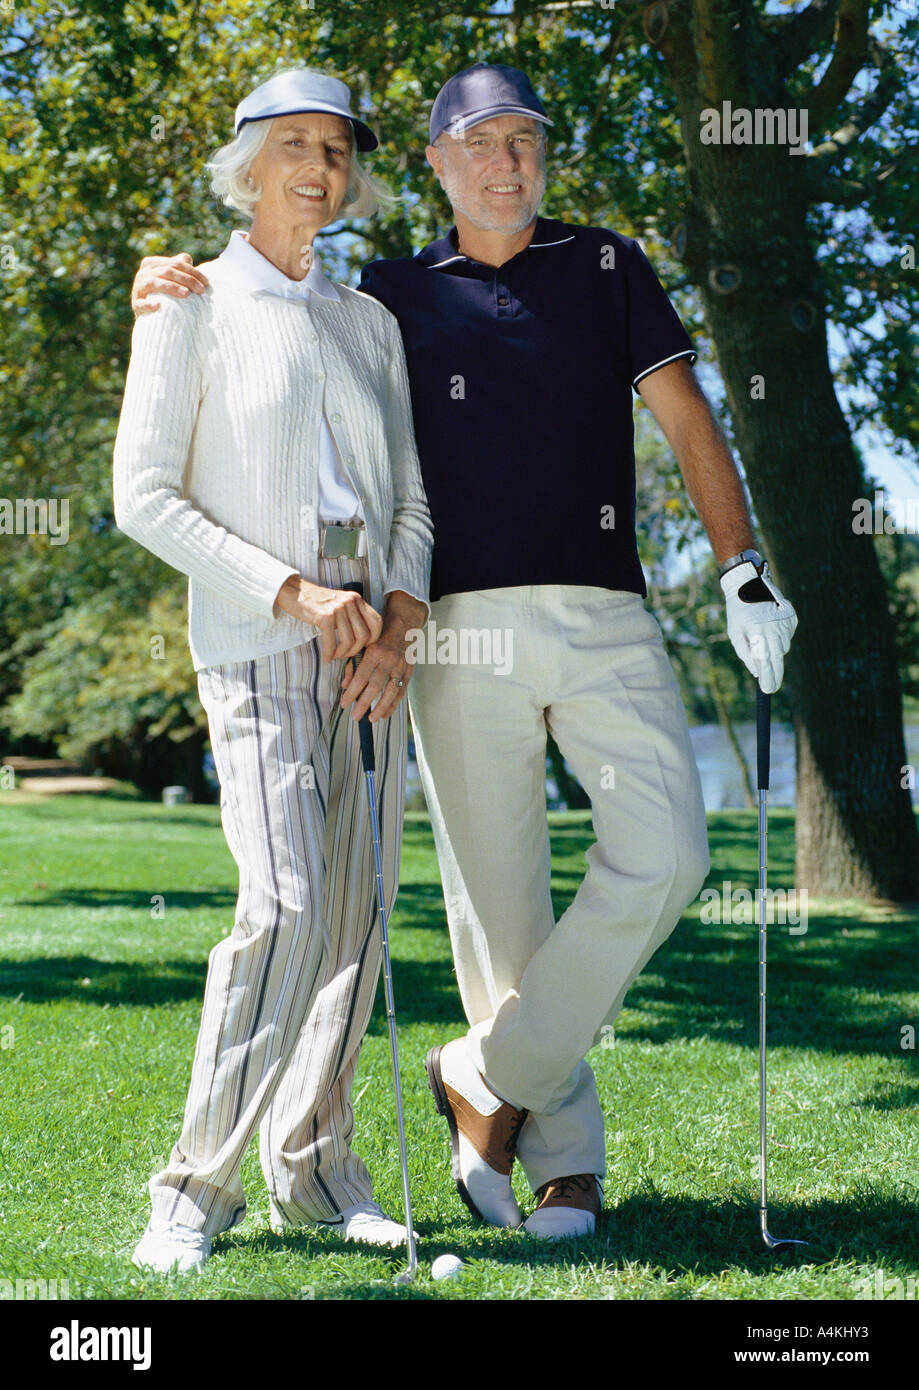 Mature couple playing golf Banque D'Images